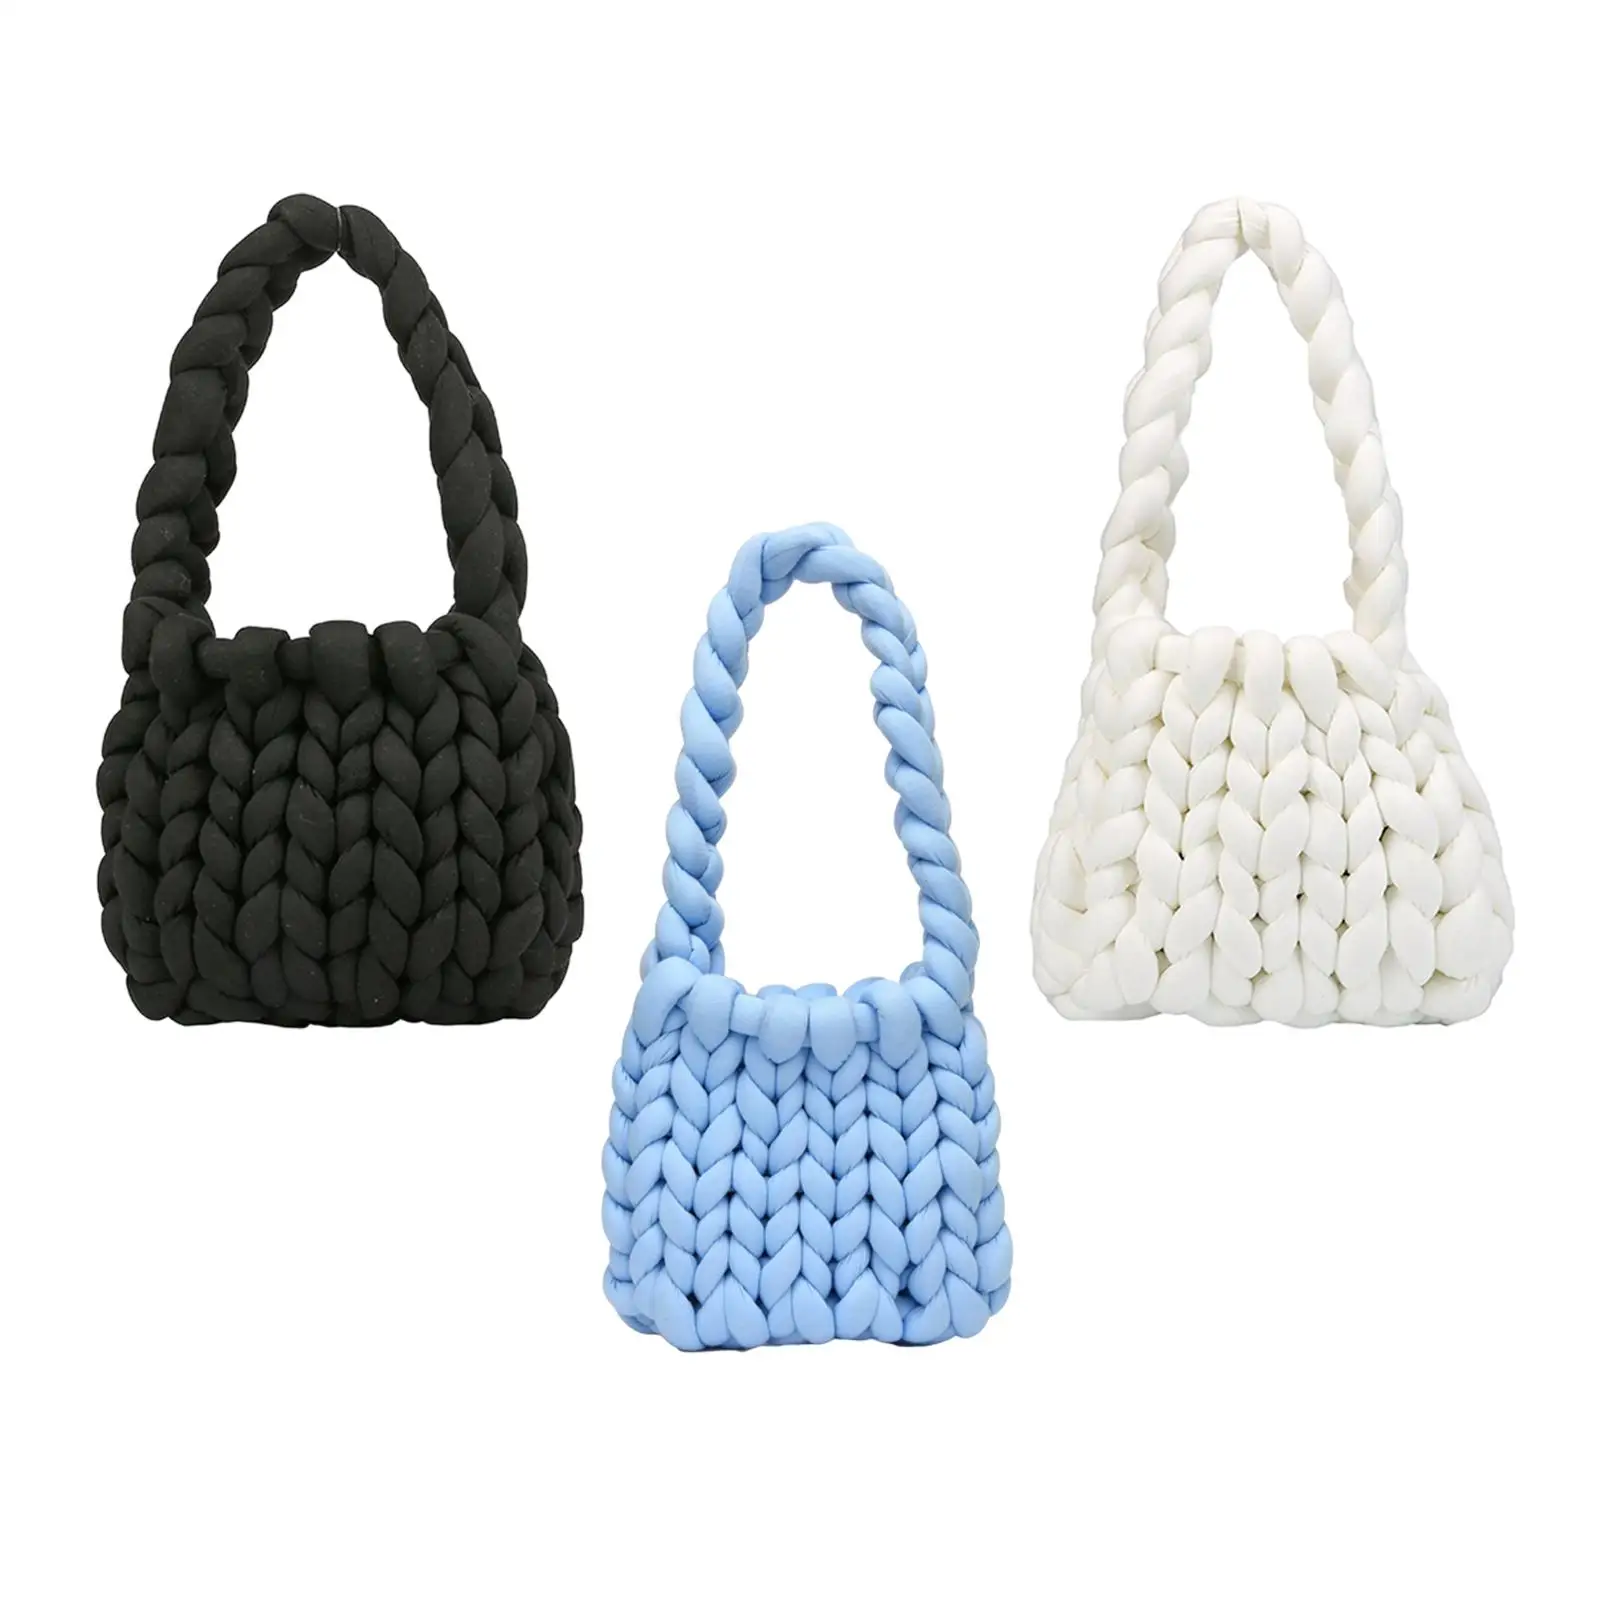 Thick Yarn Comfortable Durable Knitting for DIY Tote Making Home Decorations